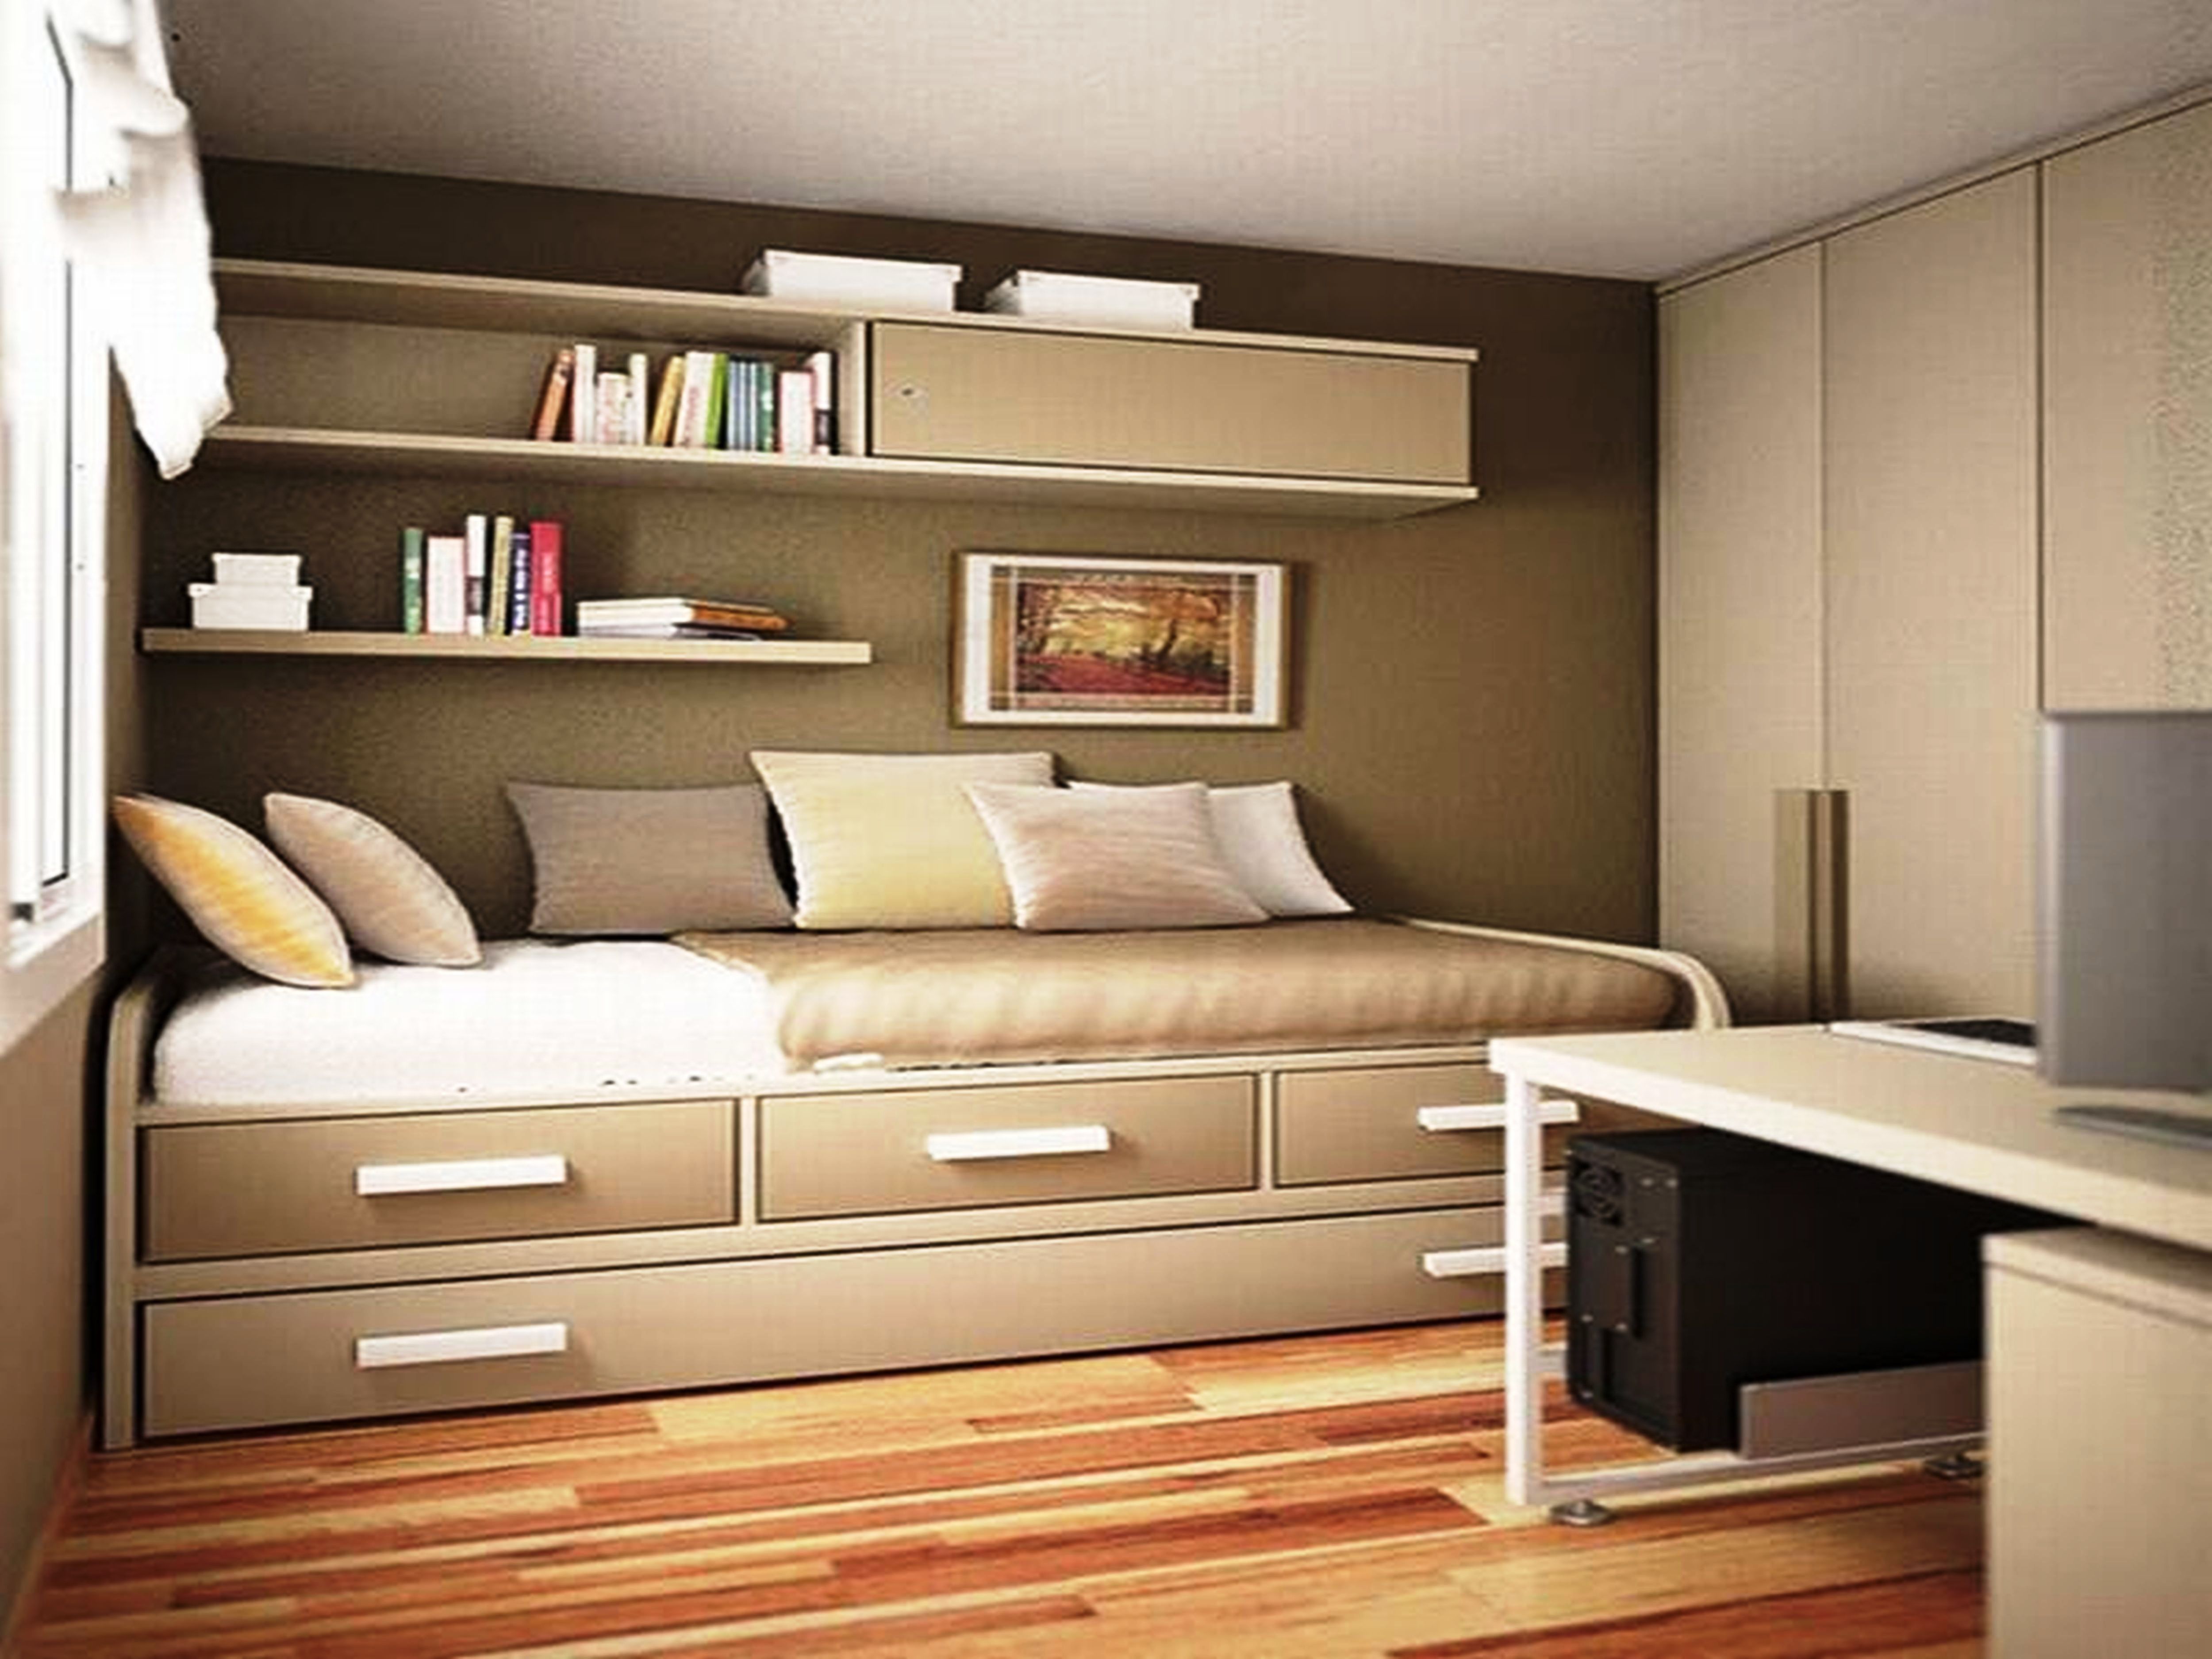 ikea bedroom furniture for small spaces photo - 1